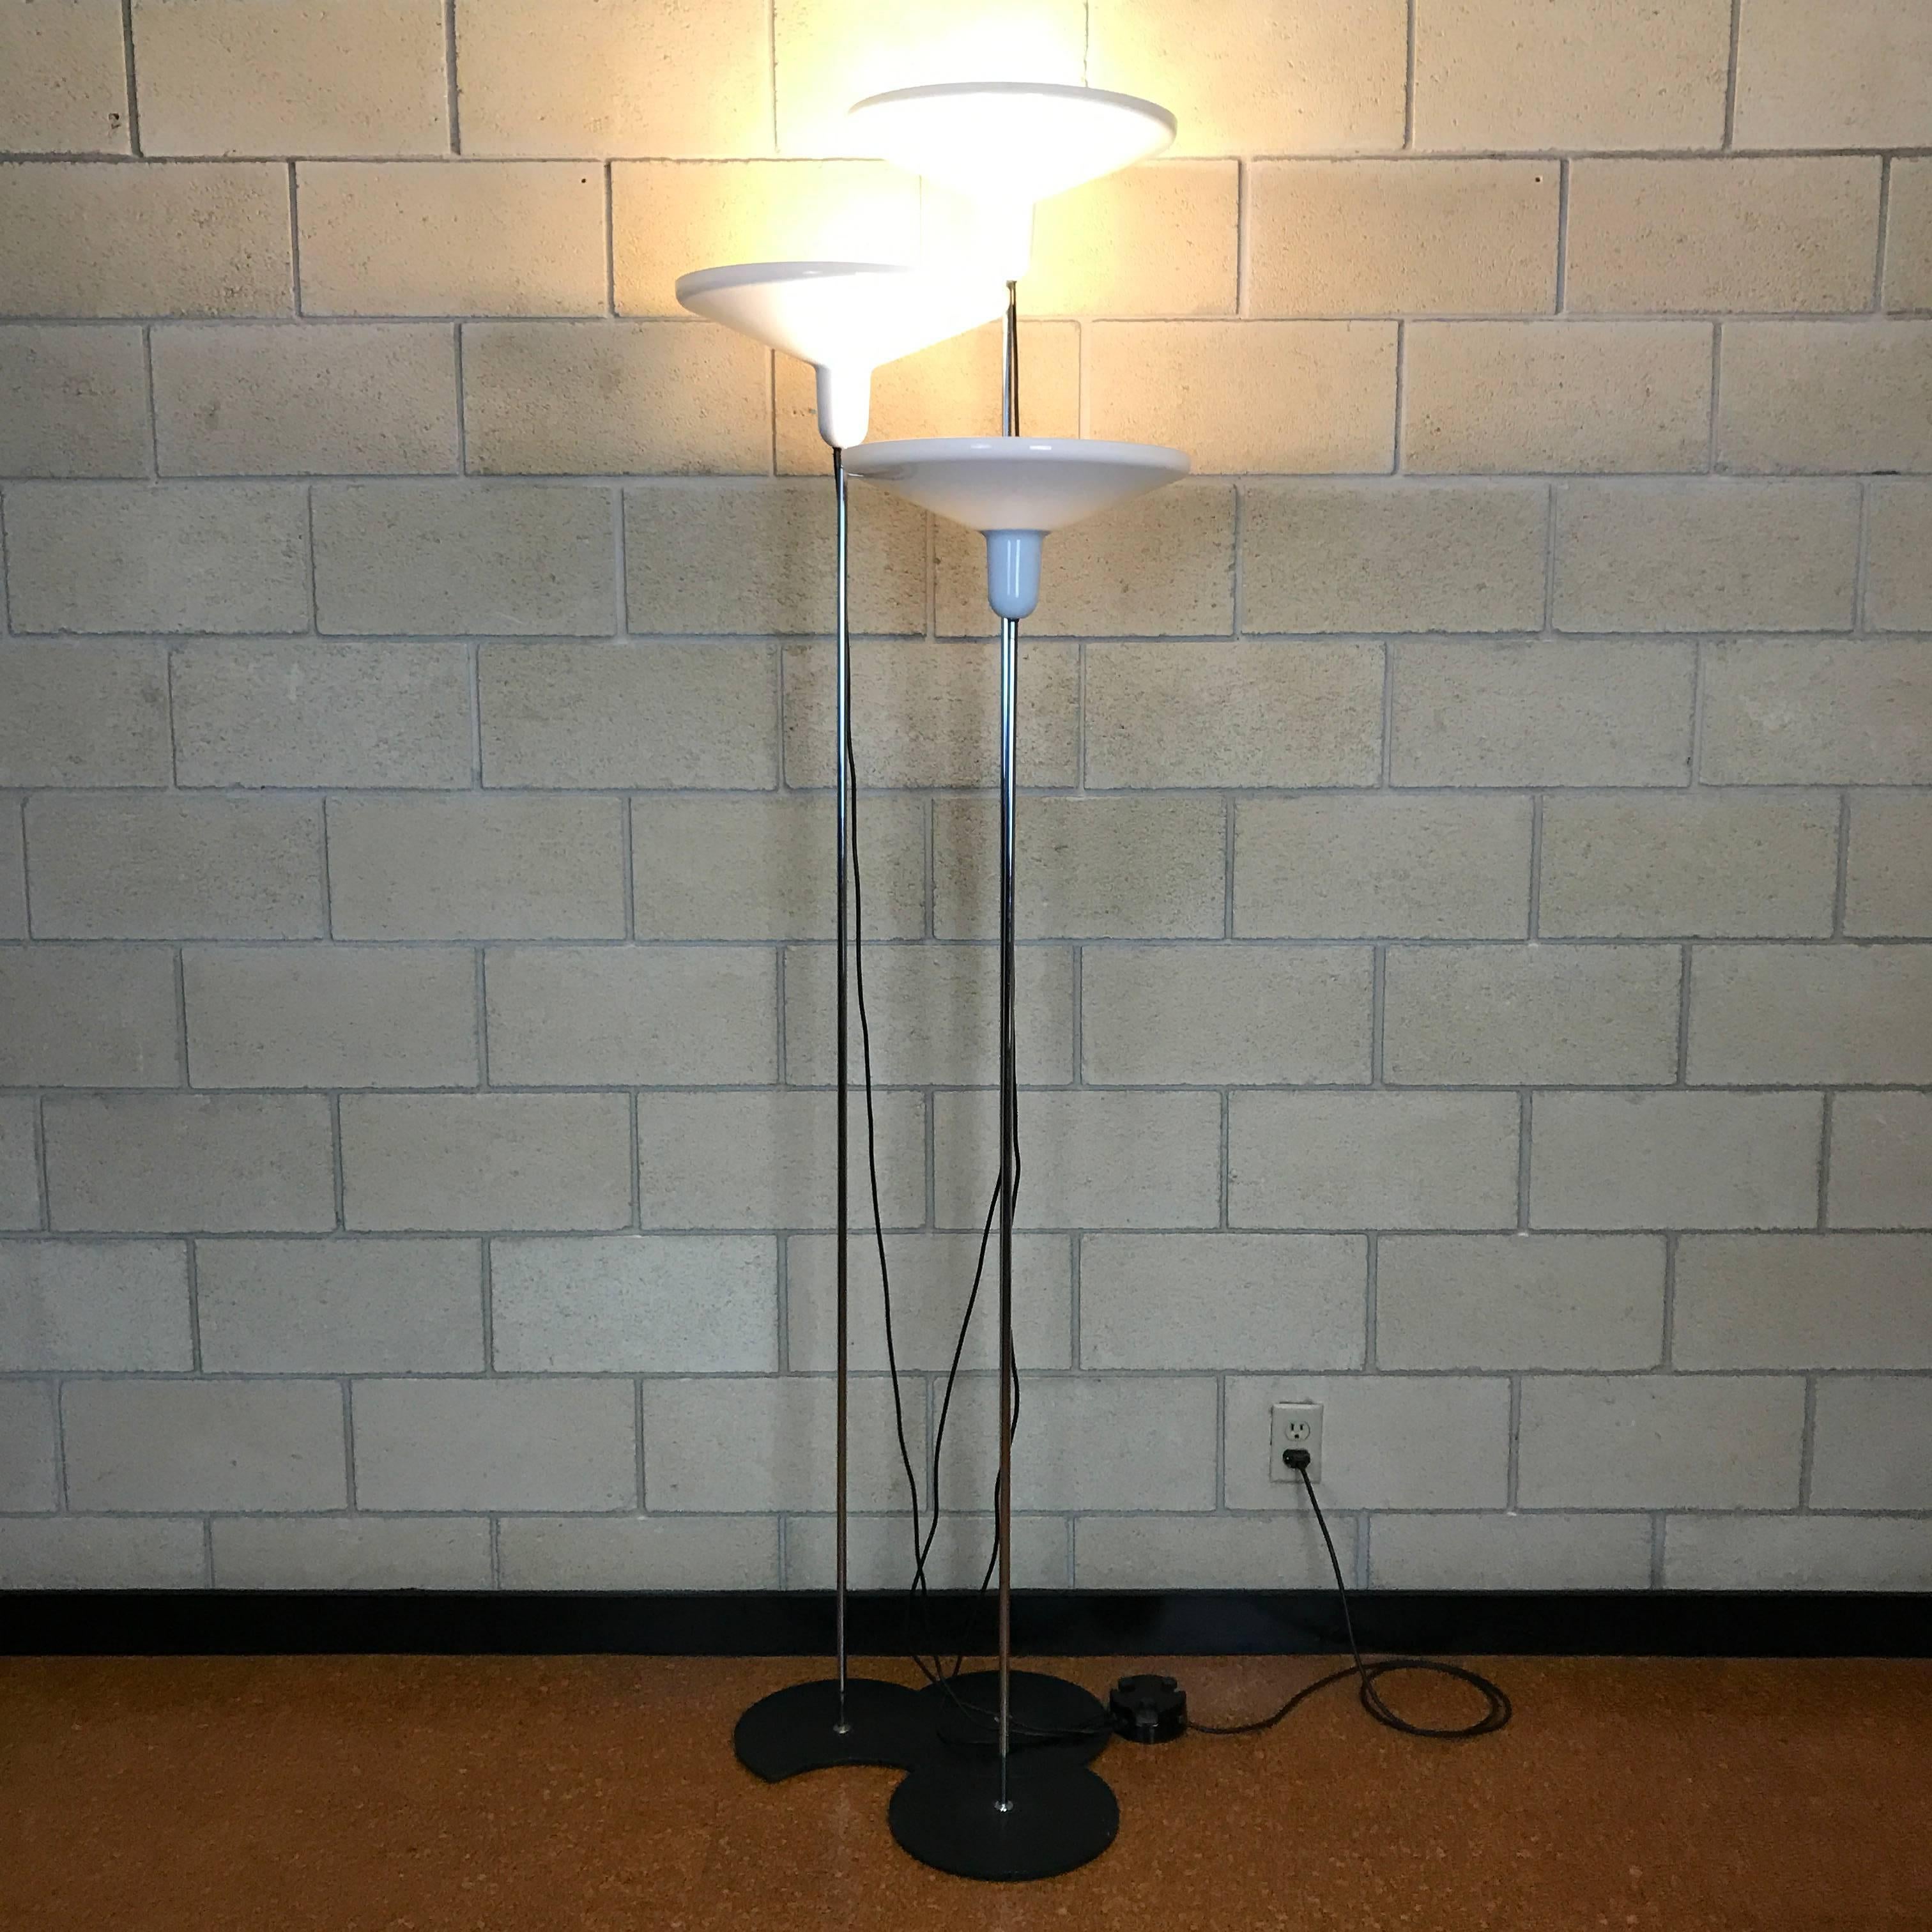 Beautiful set of three Italian Modern floor lamps made of metal and acrylic by Harvey Guzzini for Harveiluce; Made in Italy. Each lamp is on a half-moon style base that allows it to nest with the other two lamps to create the design you desire.